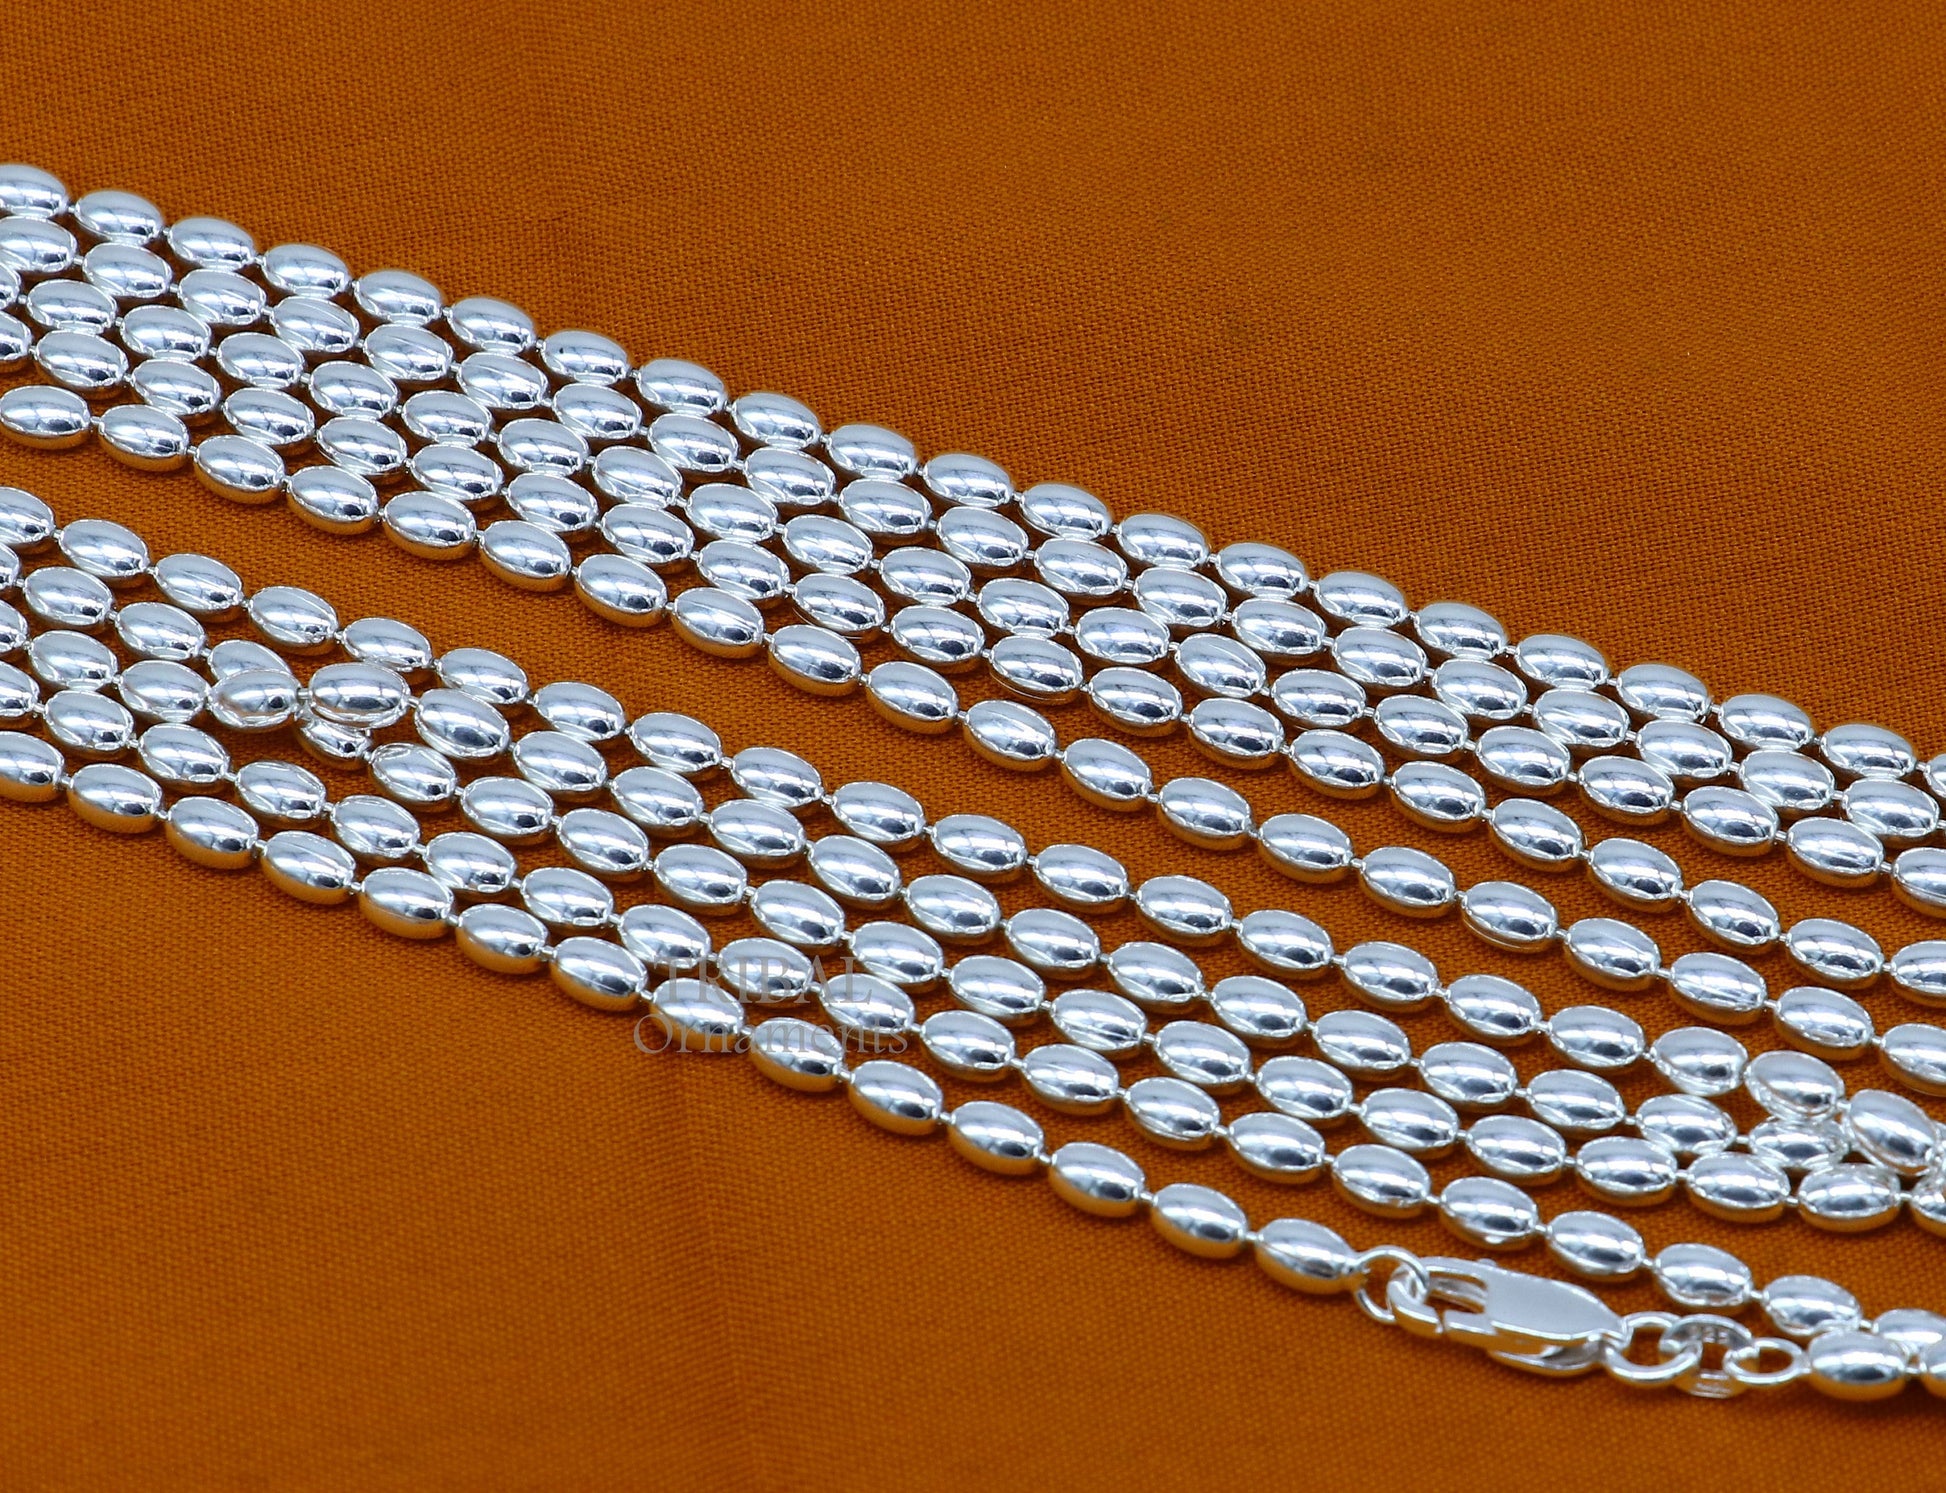 3MM 925 sterling silver handmade delicate trendy fancy beaded chain necklace baht chain for captivating beauty and graceful movement CH220 - TRIBAL ORNAMENTS